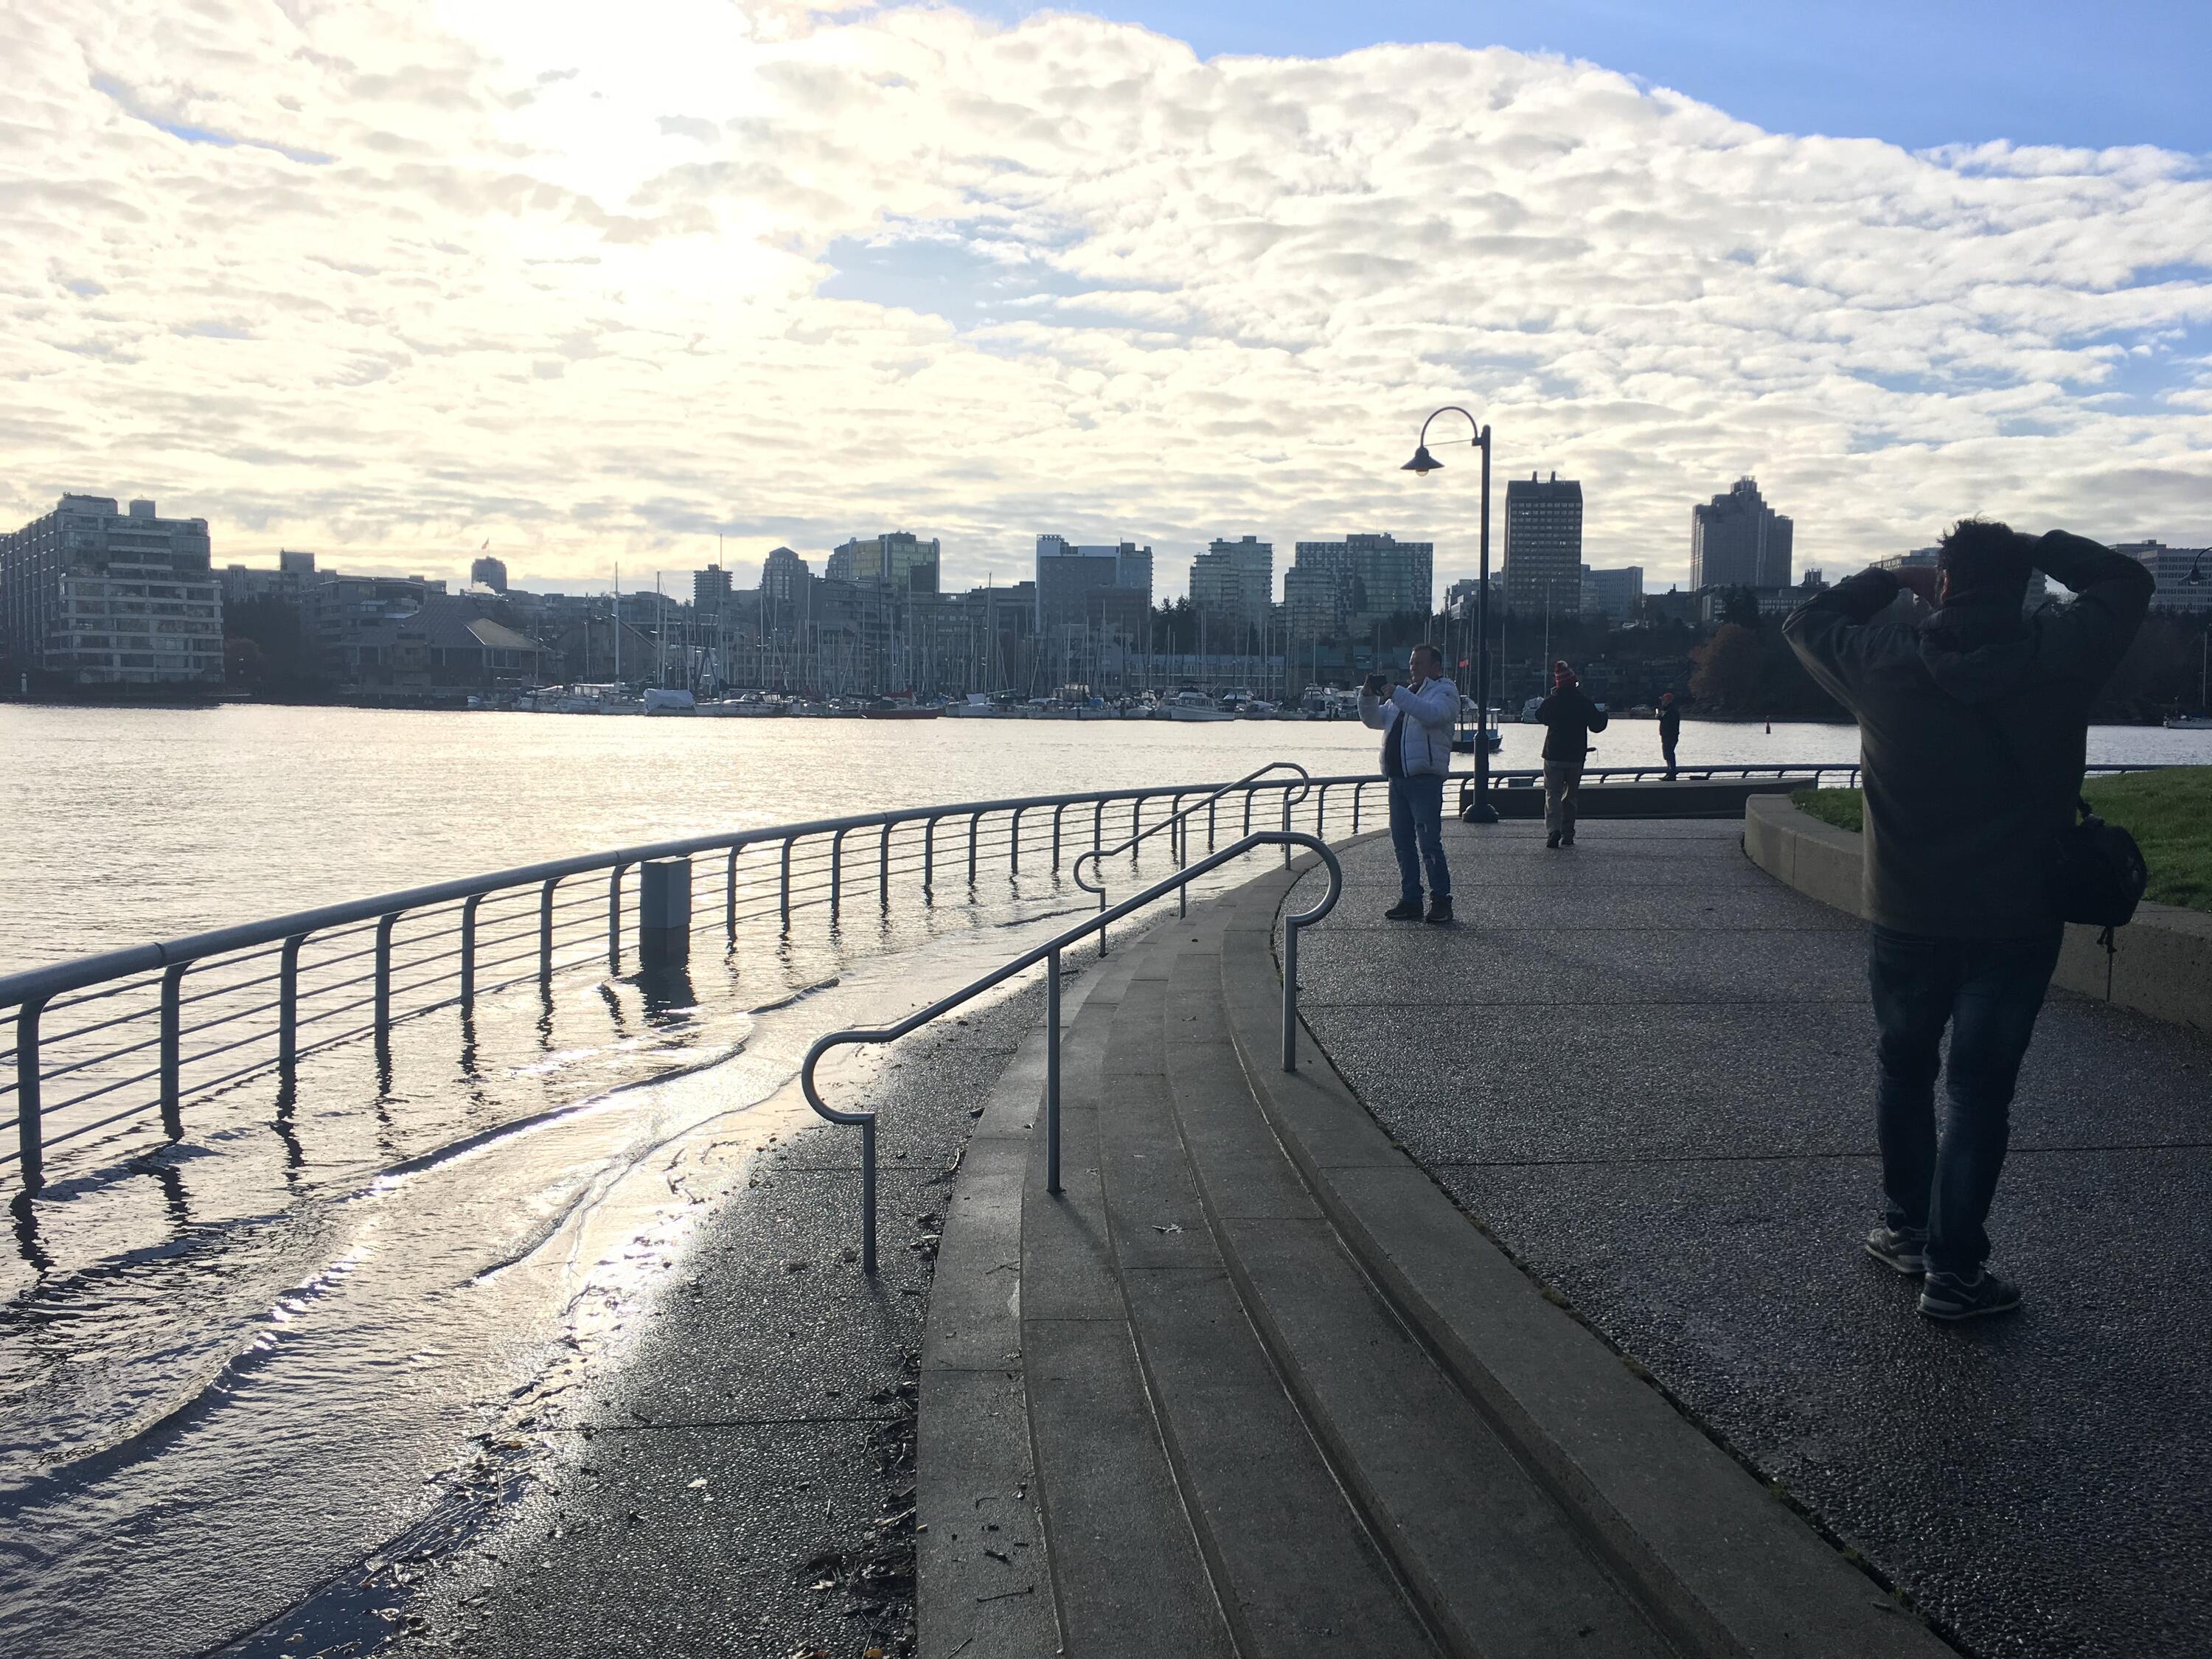 Yaletown, Vancouver BC: The 2017 King Tide in Yaletown saw water lapping over the edge of the walkway and flooding parts of the 